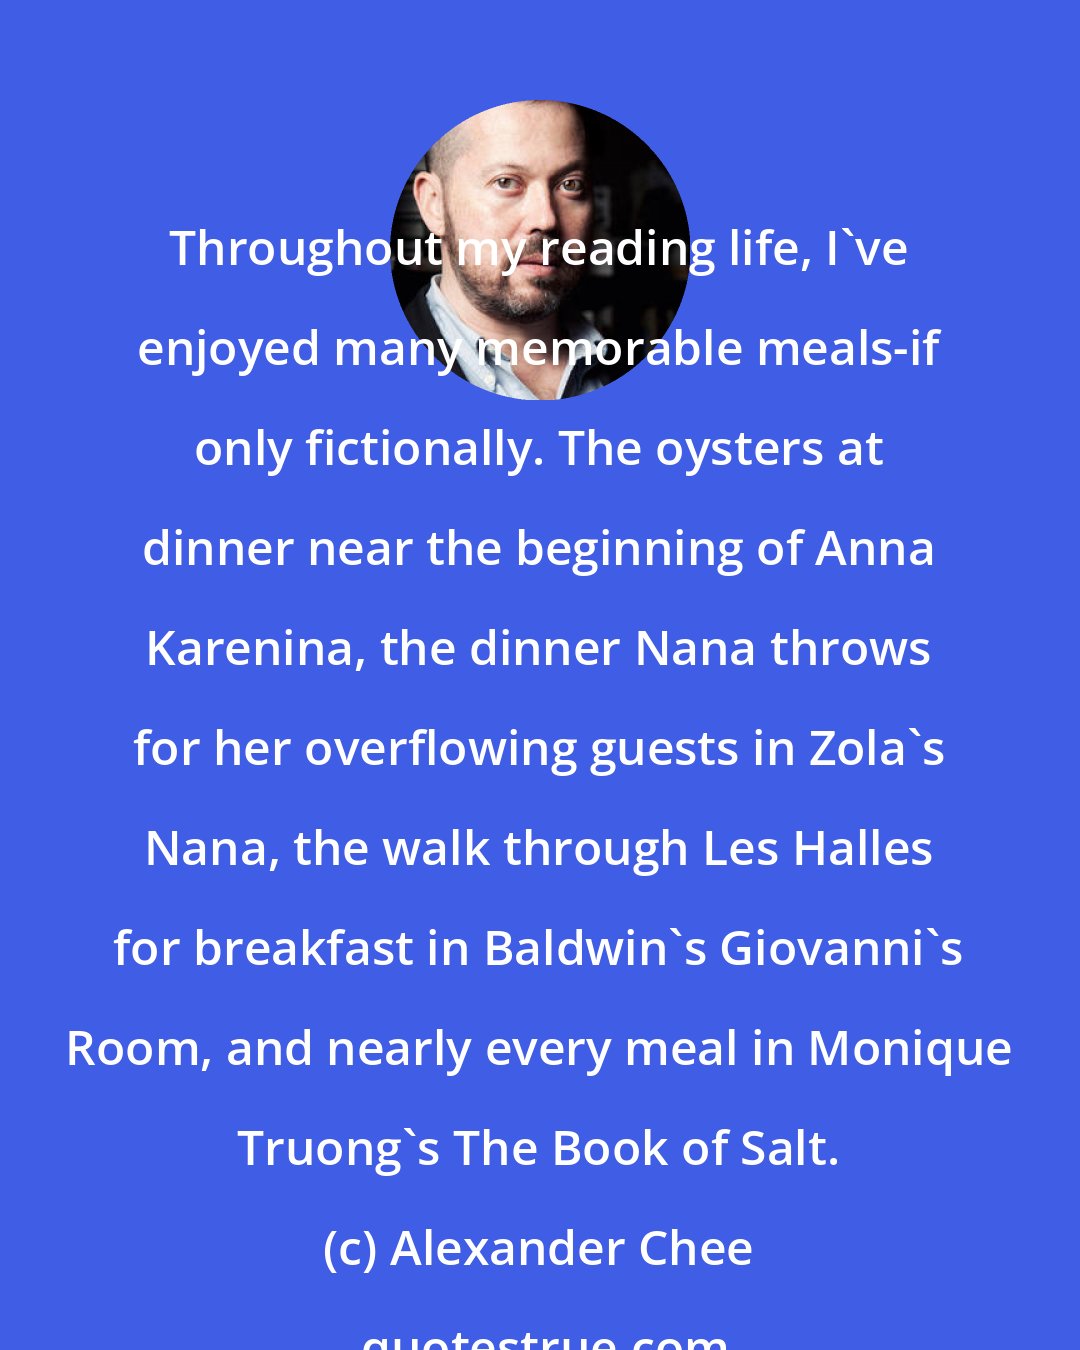 Alexander Chee: Throughout my reading life, I've enjoyed many memorable meals-if only fictionally. The oysters at dinner near the beginning of Anna Karenina, the dinner Nana throws for her overflowing guests in Zola's Nana, the walk through Les Halles for breakfast in Baldwin's Giovanni's Room, and nearly every meal in Monique Truong's The Book of Salt.